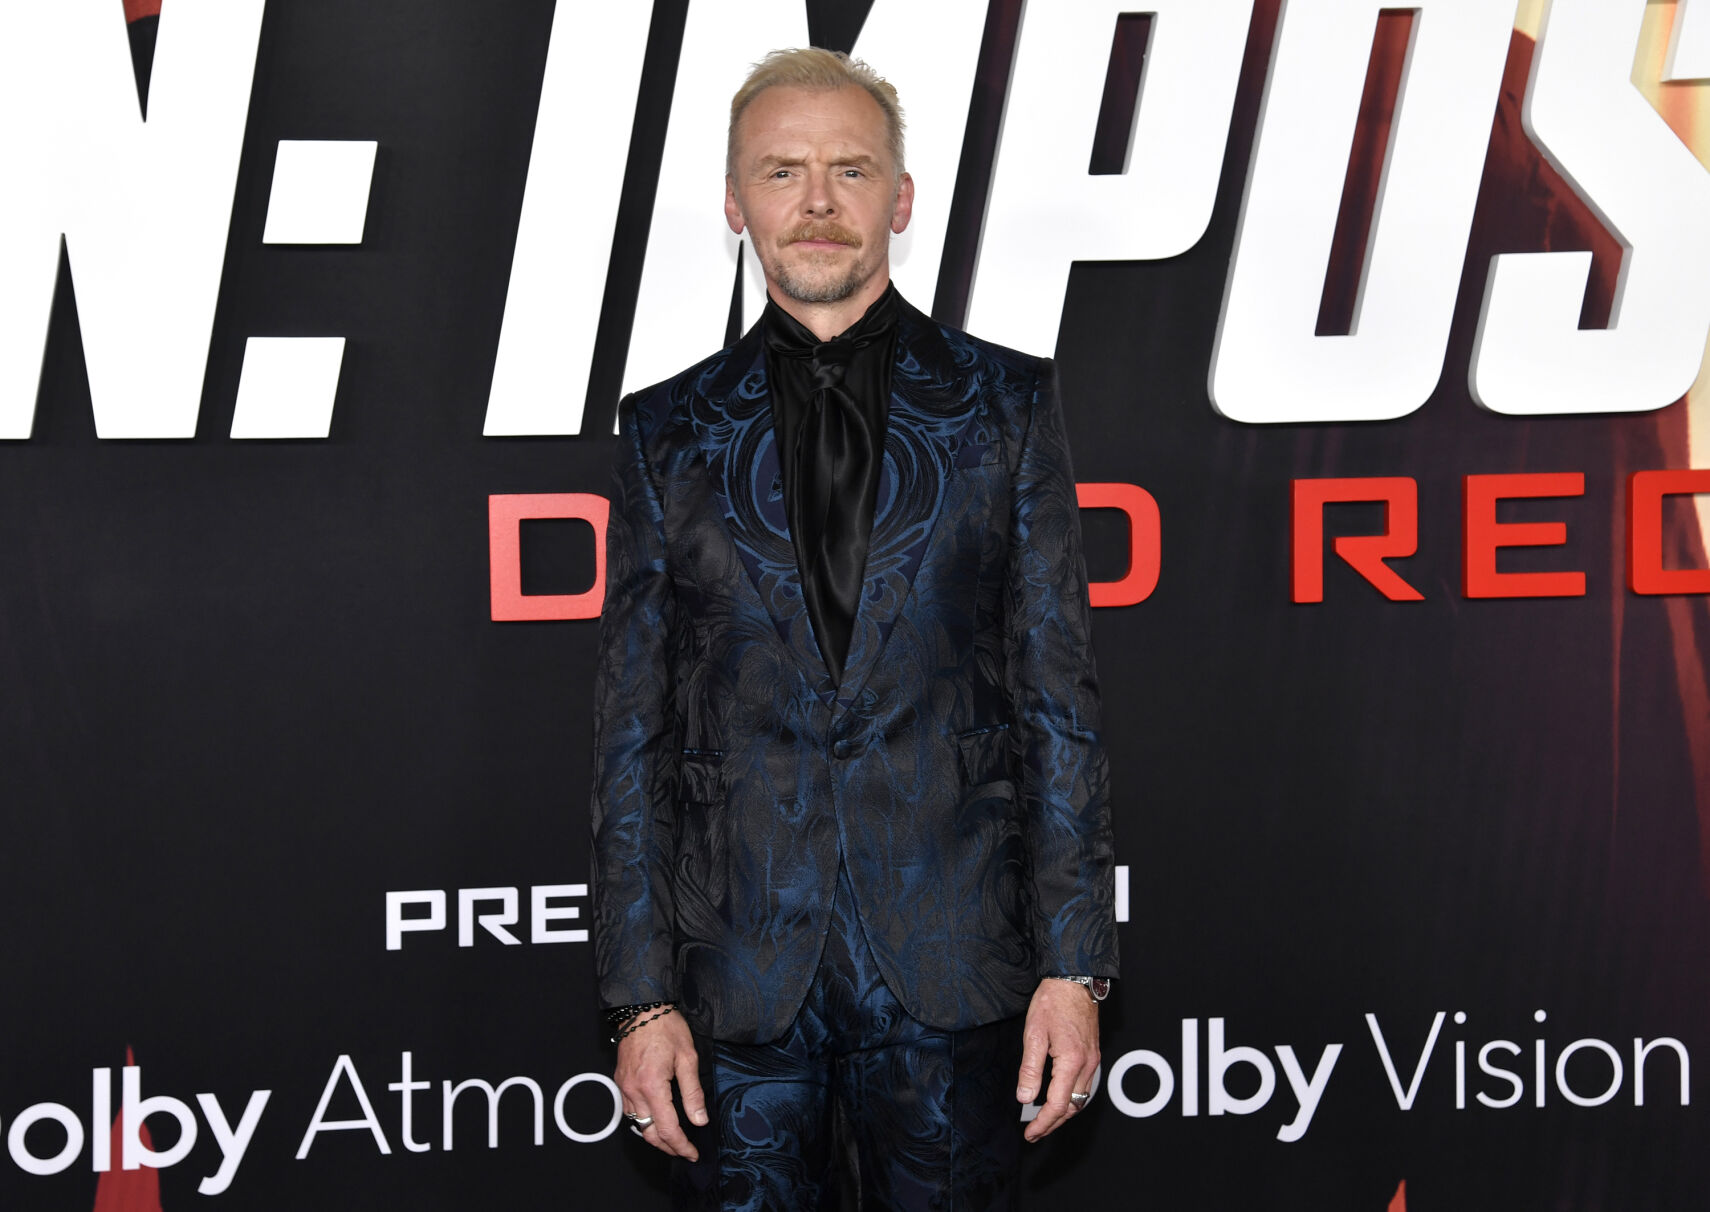 Simon Pegg at the premiere of "Mission: Impossible - Dead Reckoning Part One" held at Rose Theater, at Jazz at Lincoln Center's Frederick P. Rose Hall on July 10, 2023 in New York, New York.